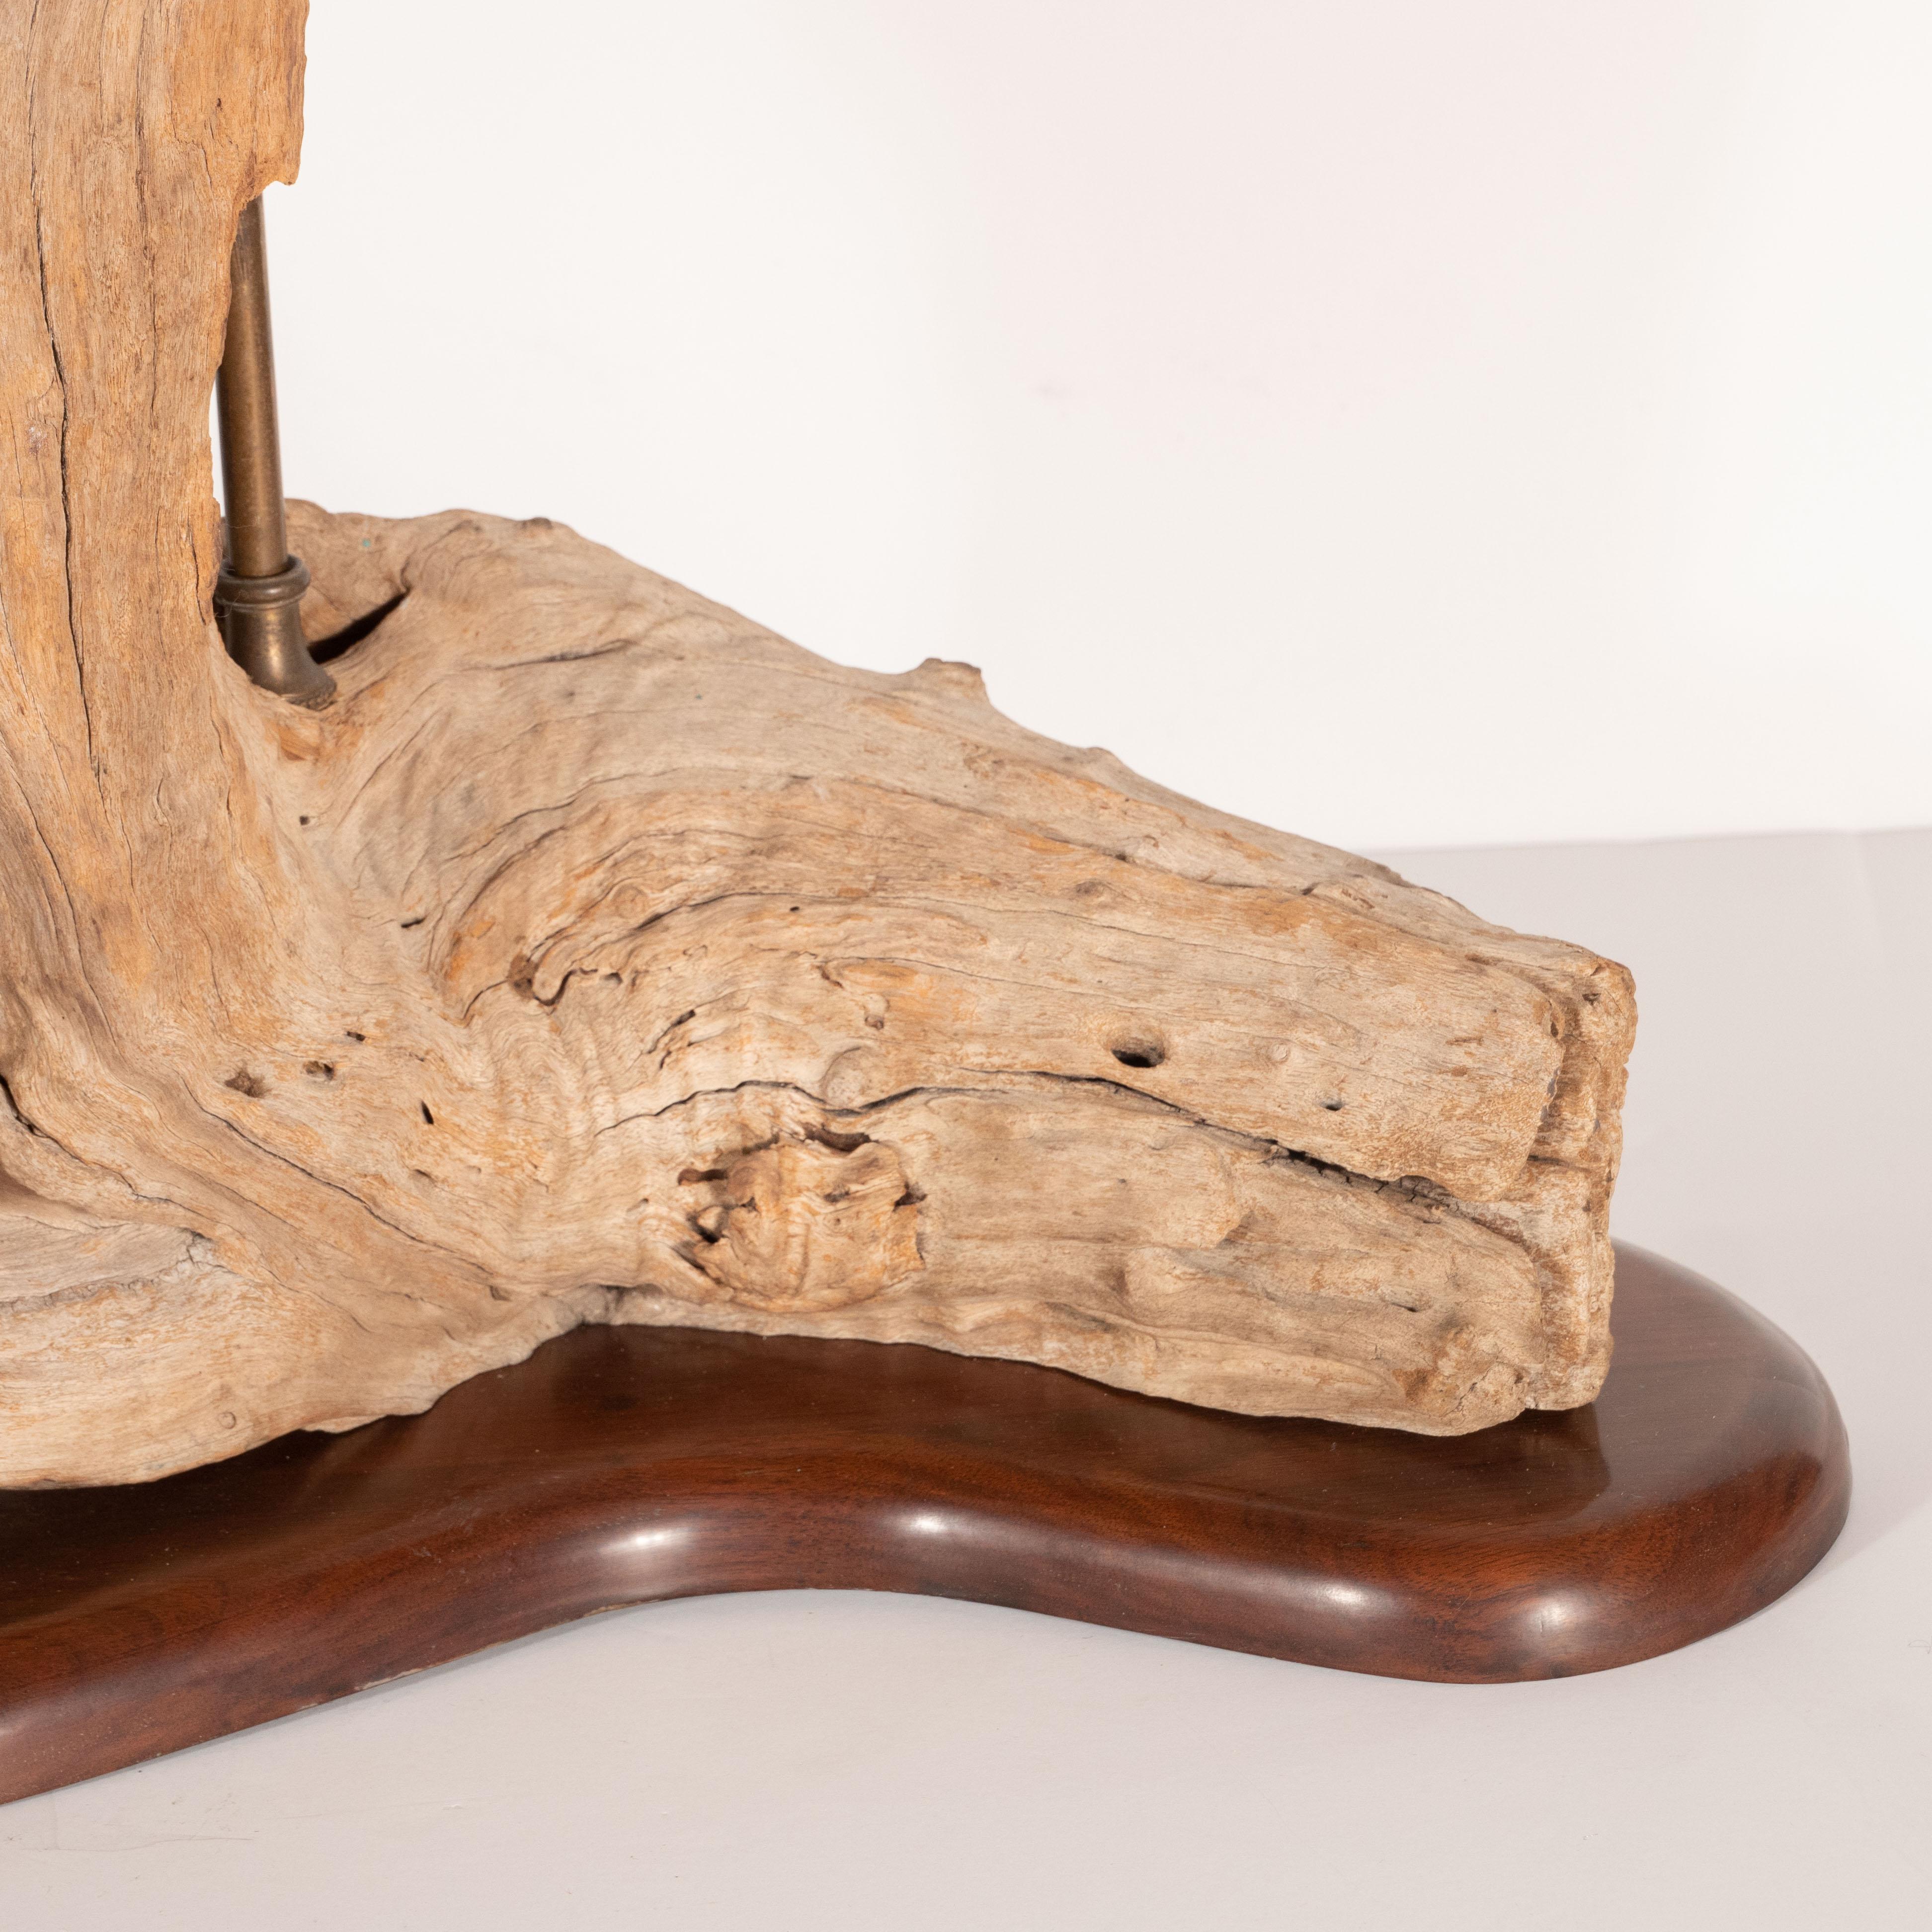 driftwood table lamps